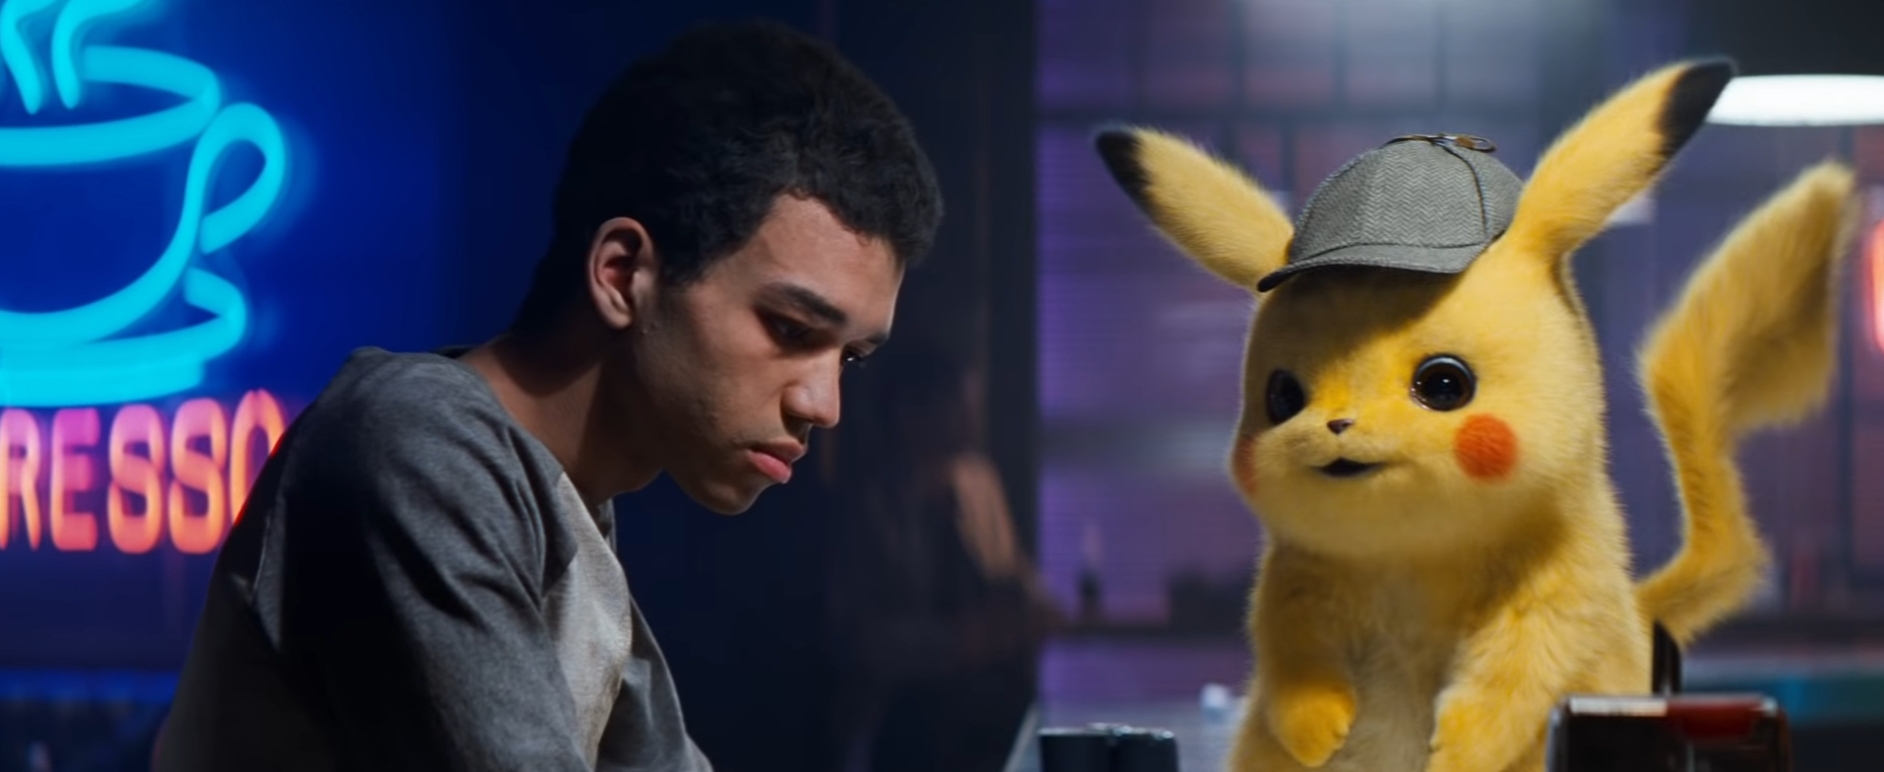 Pokemon Detective Pikachu official trailer 2 watch now